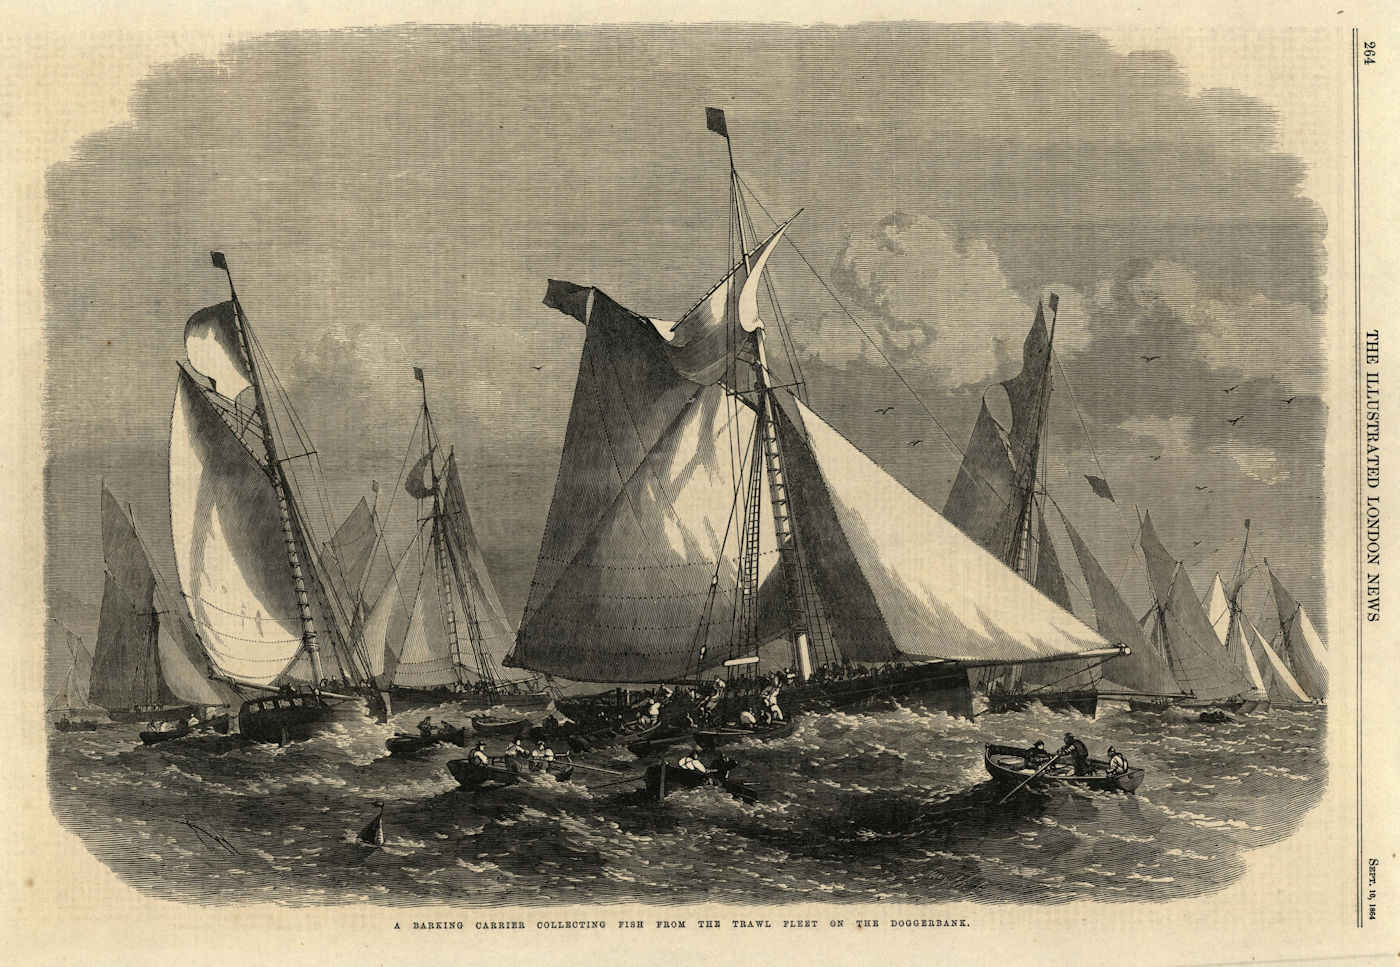 A Barking carrier collecting fish from the trawler fleet on the Dogger Bank 1864